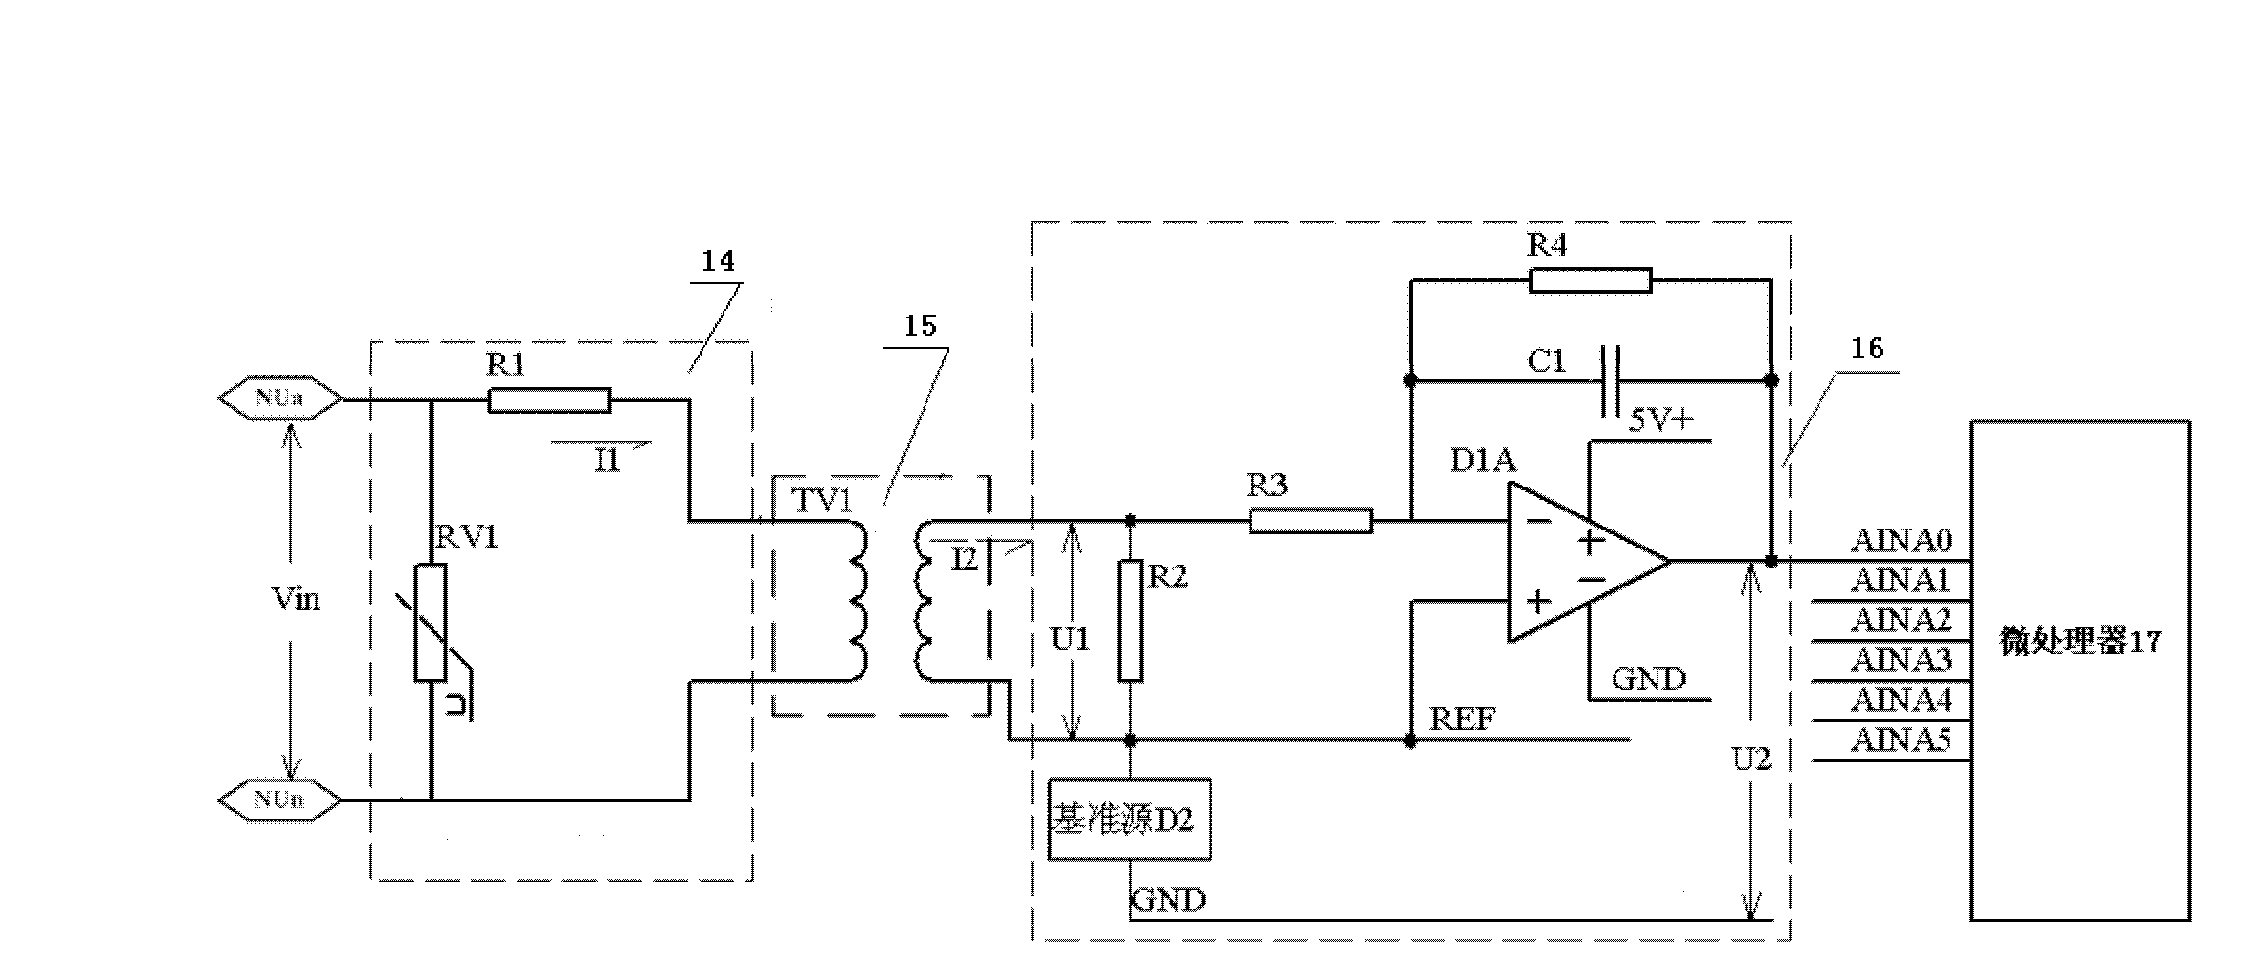 Voltage sampling circuit and controller applicable to dual-power automatic transfer switch